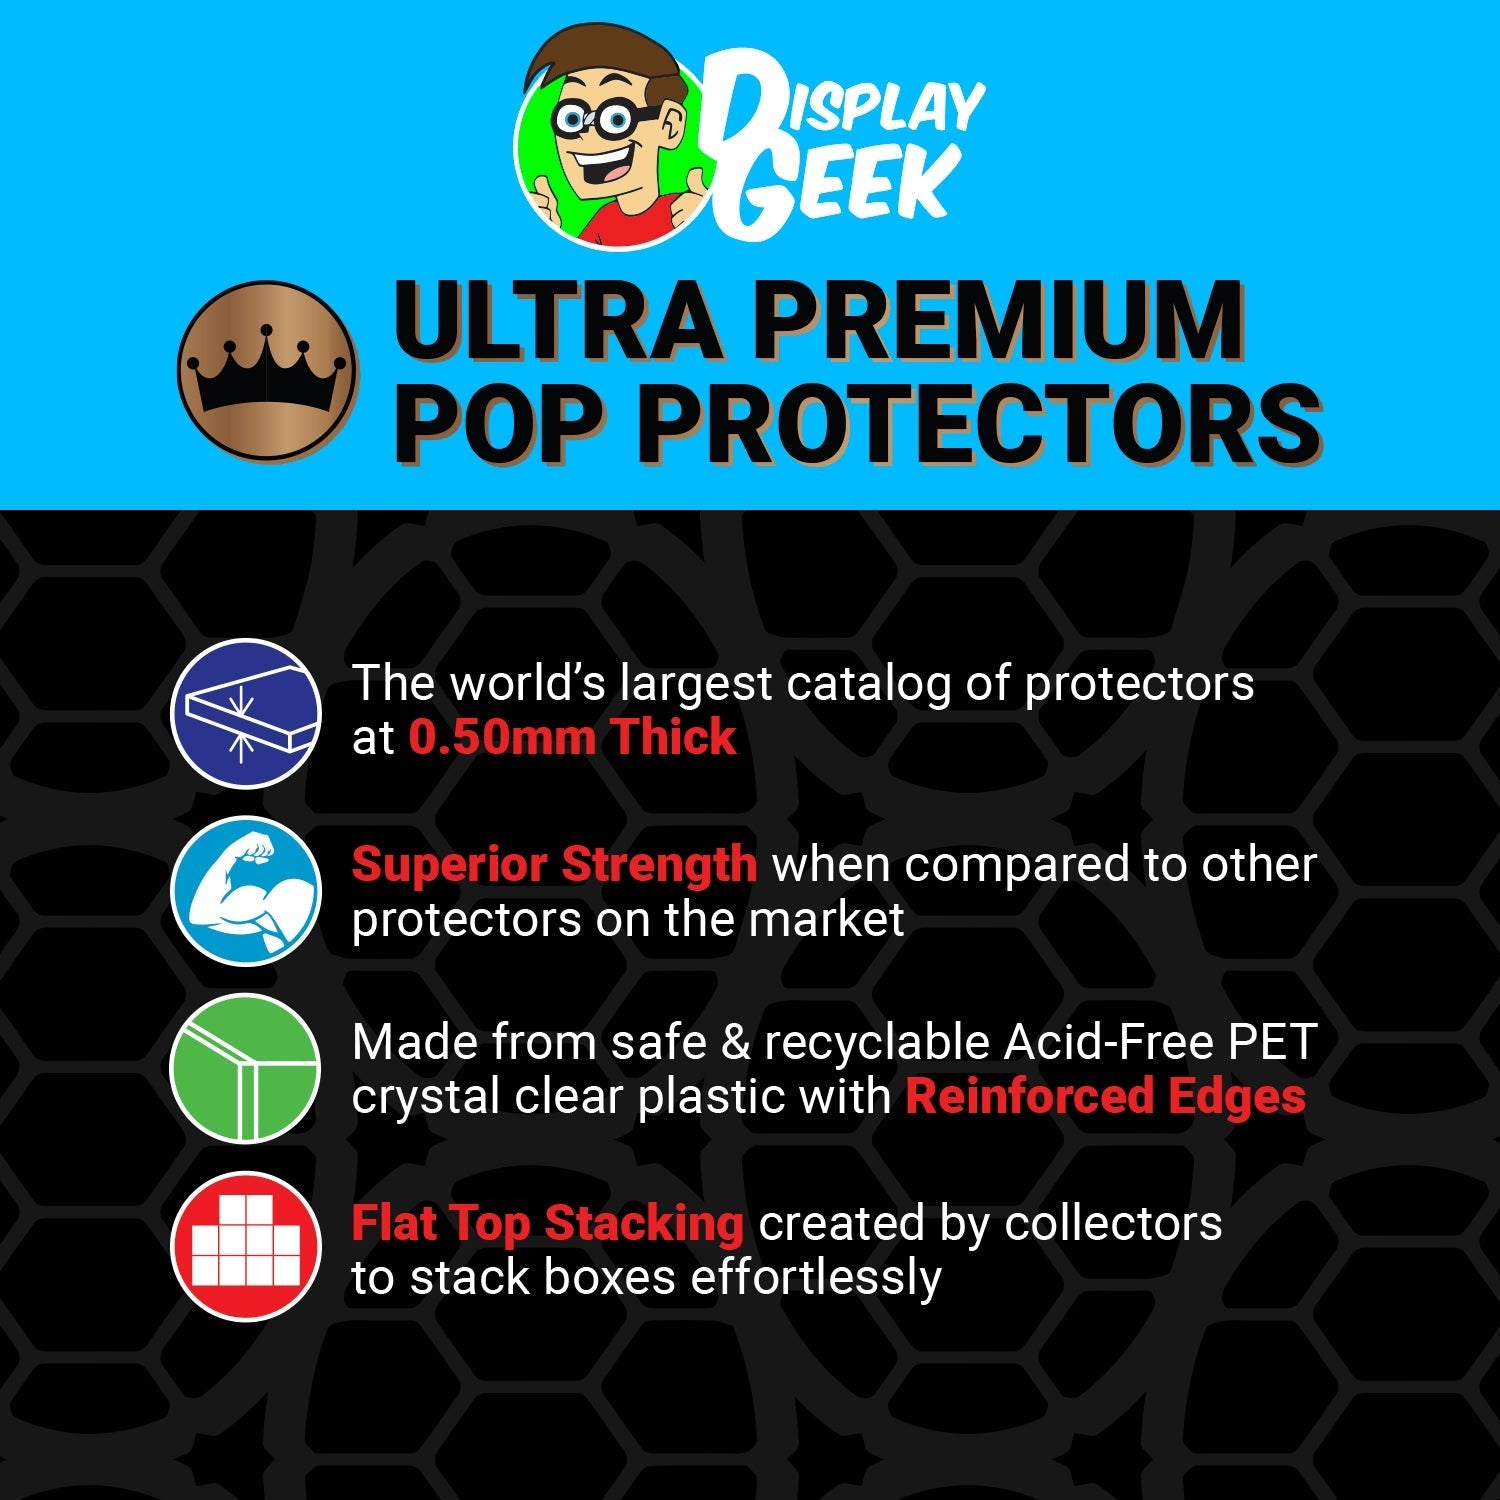 Pop Protector for Freddy Funko as Iron Man SDCC LE 144 - PPG Pop Protector Guide Search Created by Display Geek